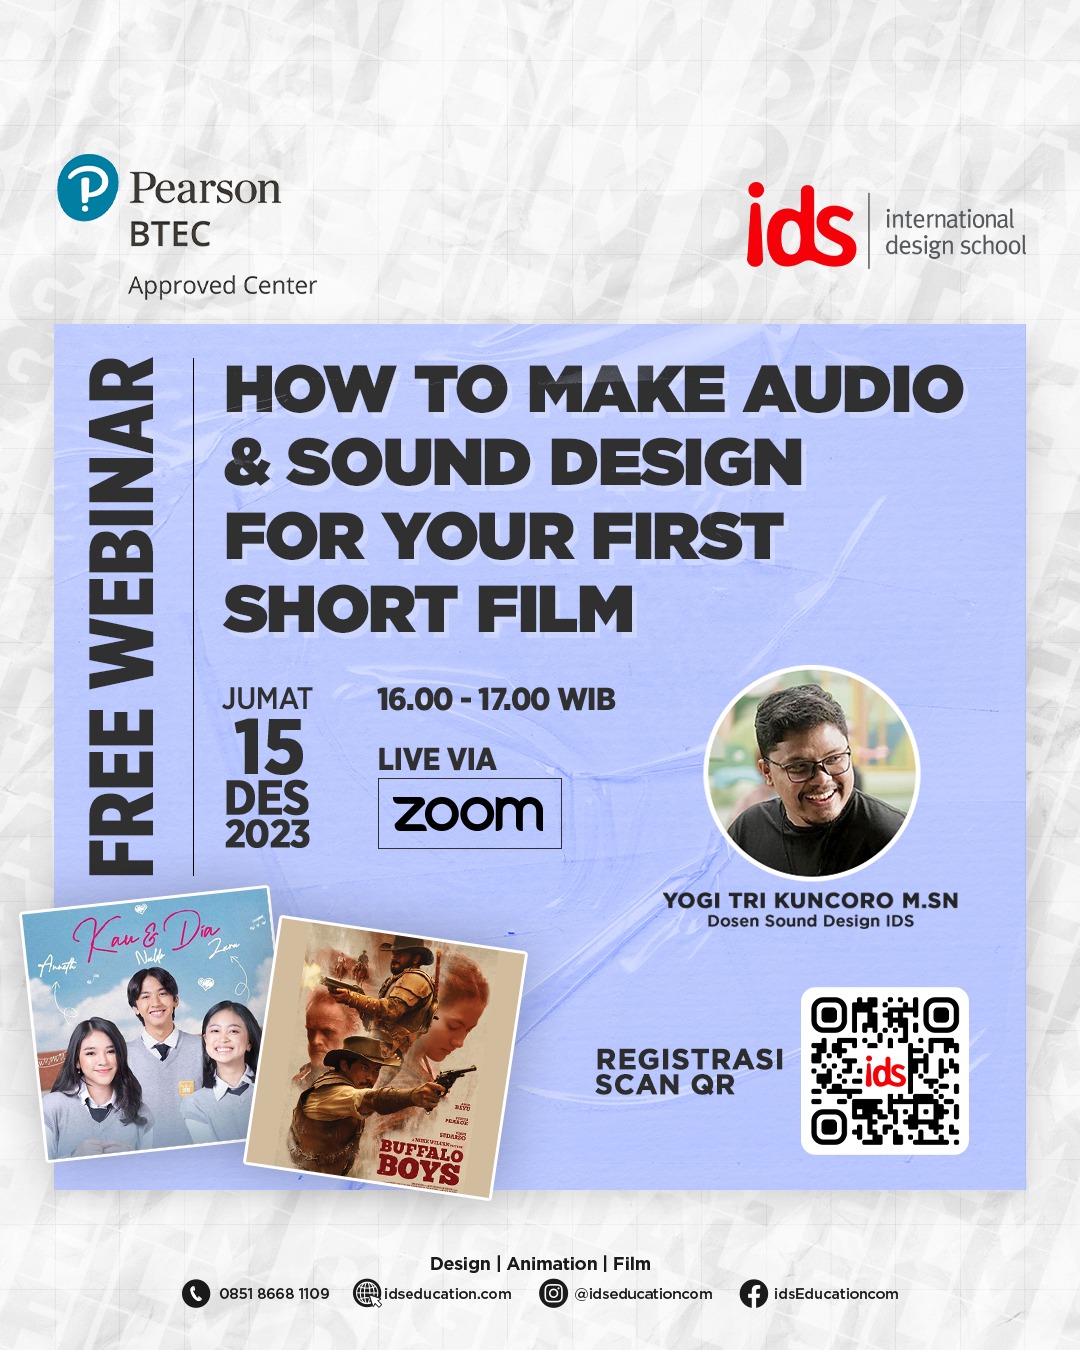 How to Make Audio & Sound Design for Your First Short Film